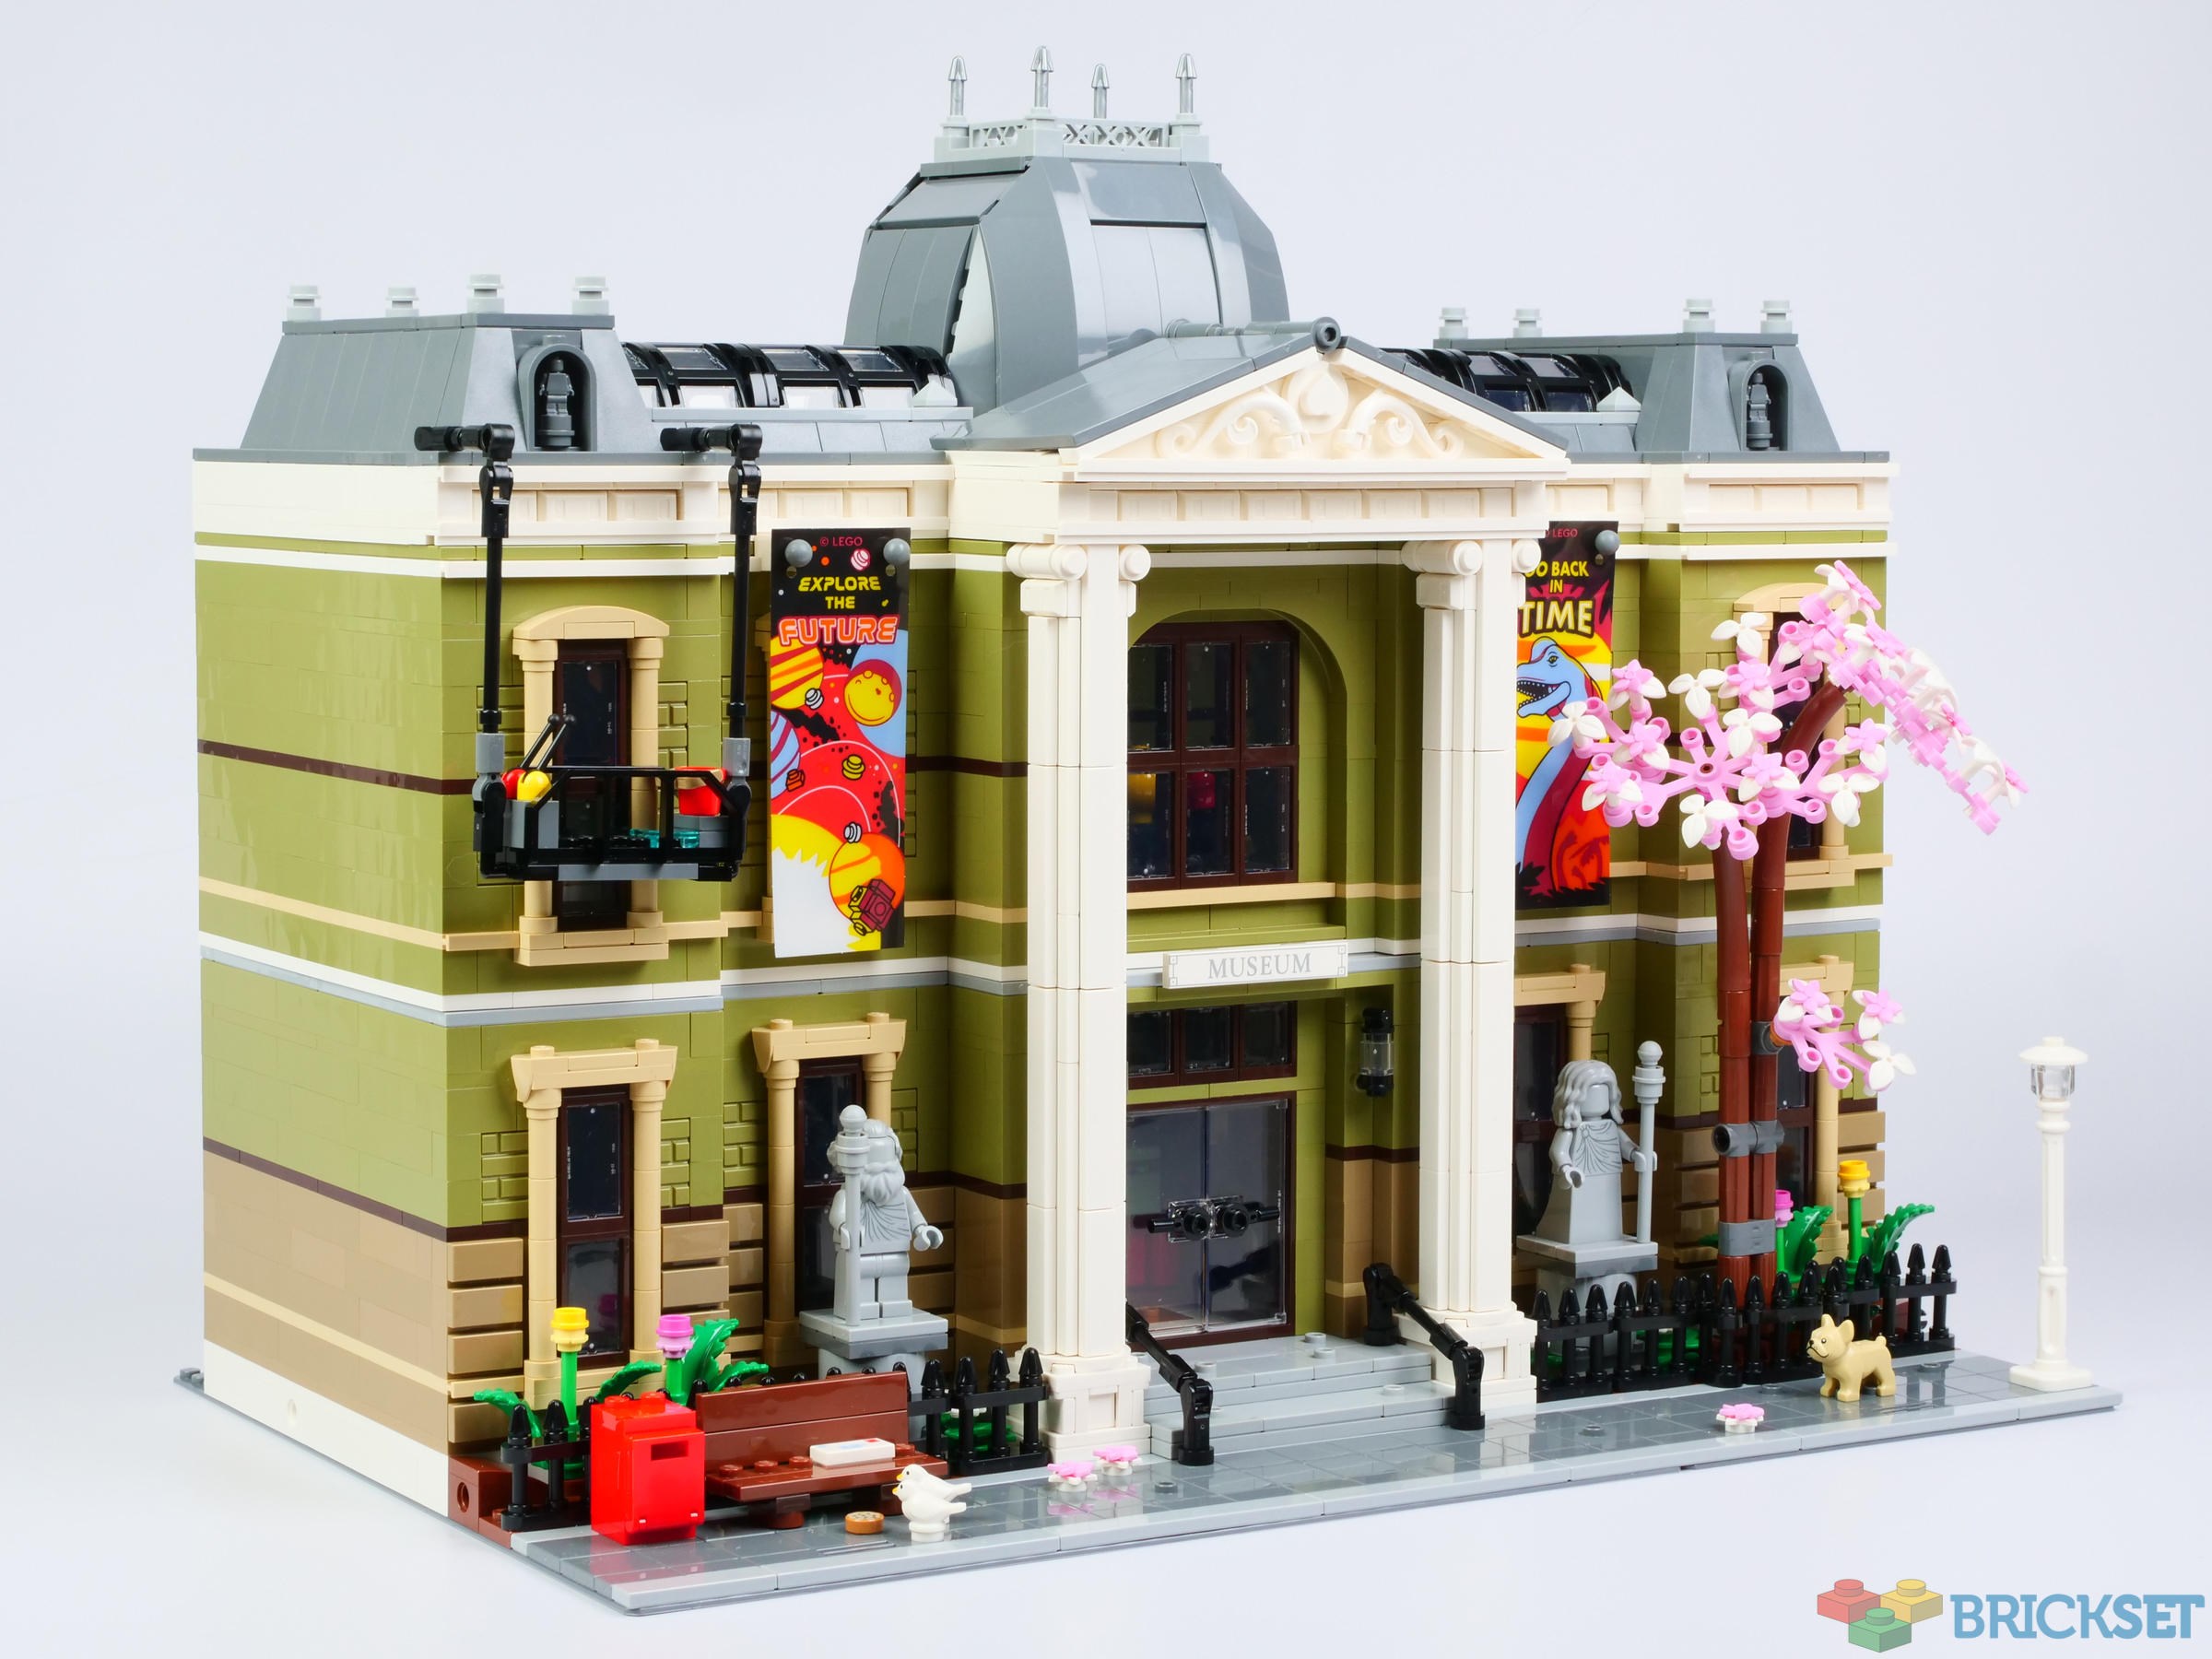 LEGO's New Botanical Collection Lends A Touch Of Nature Into